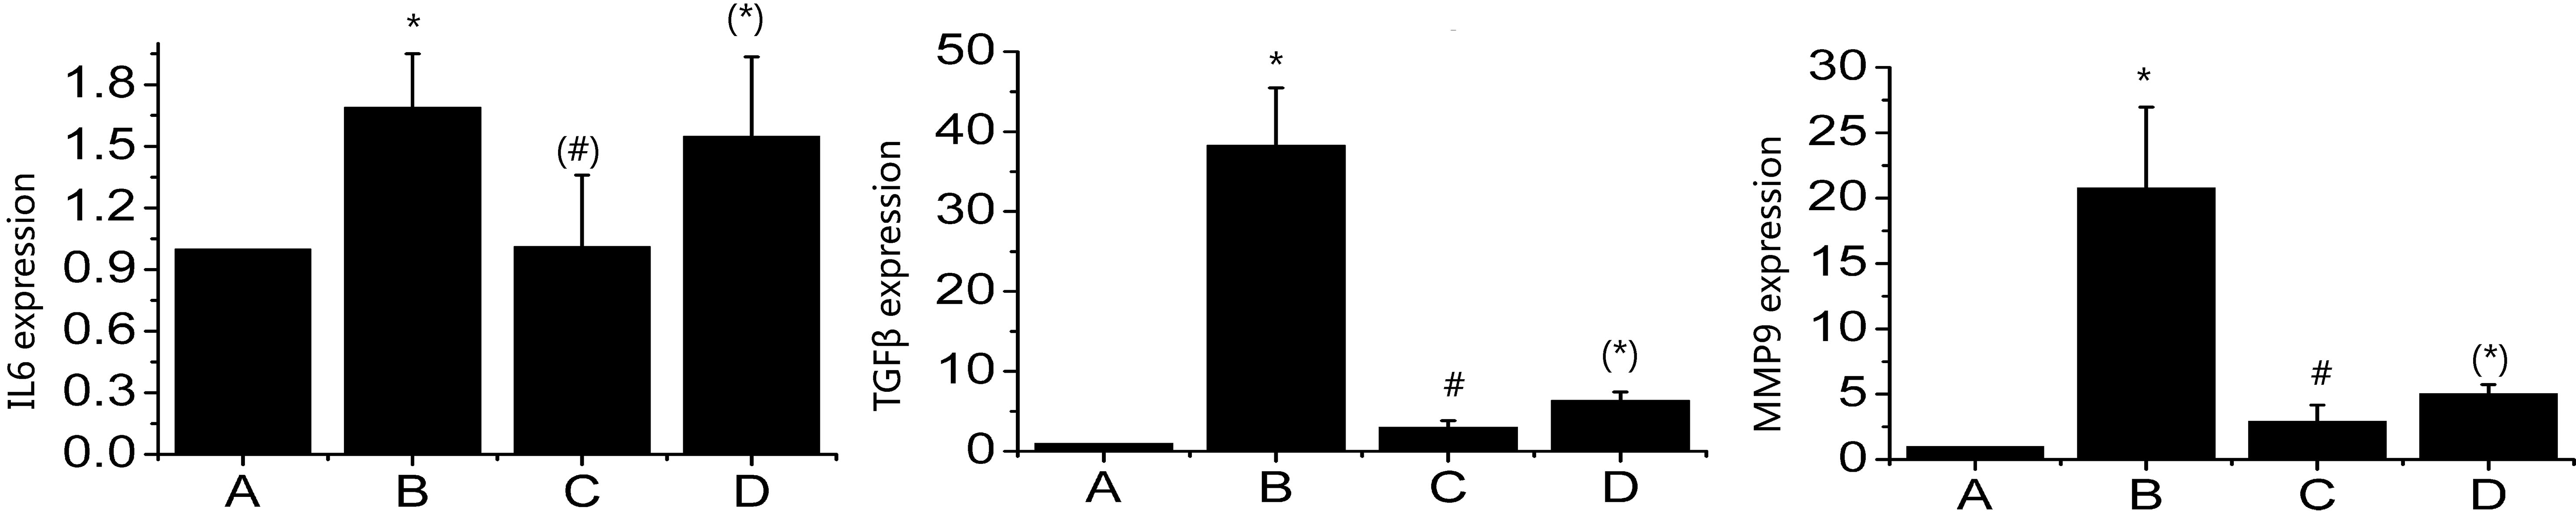 Expression levels of MMP9, TGFβ and IL6 in hyperplastic intima tissues from each group groups. Note: A: Sham operation group; B: Model group; C: High-dosage gefitinib group; D: Paclitaxel group; Comparison with sham operation group yields P*< 0.05; Comparison with the model group yields P#< 0.05; P(#)> 0.05, Comparison with the high-dosage gefitinib groups yields P(*)> 0.05.